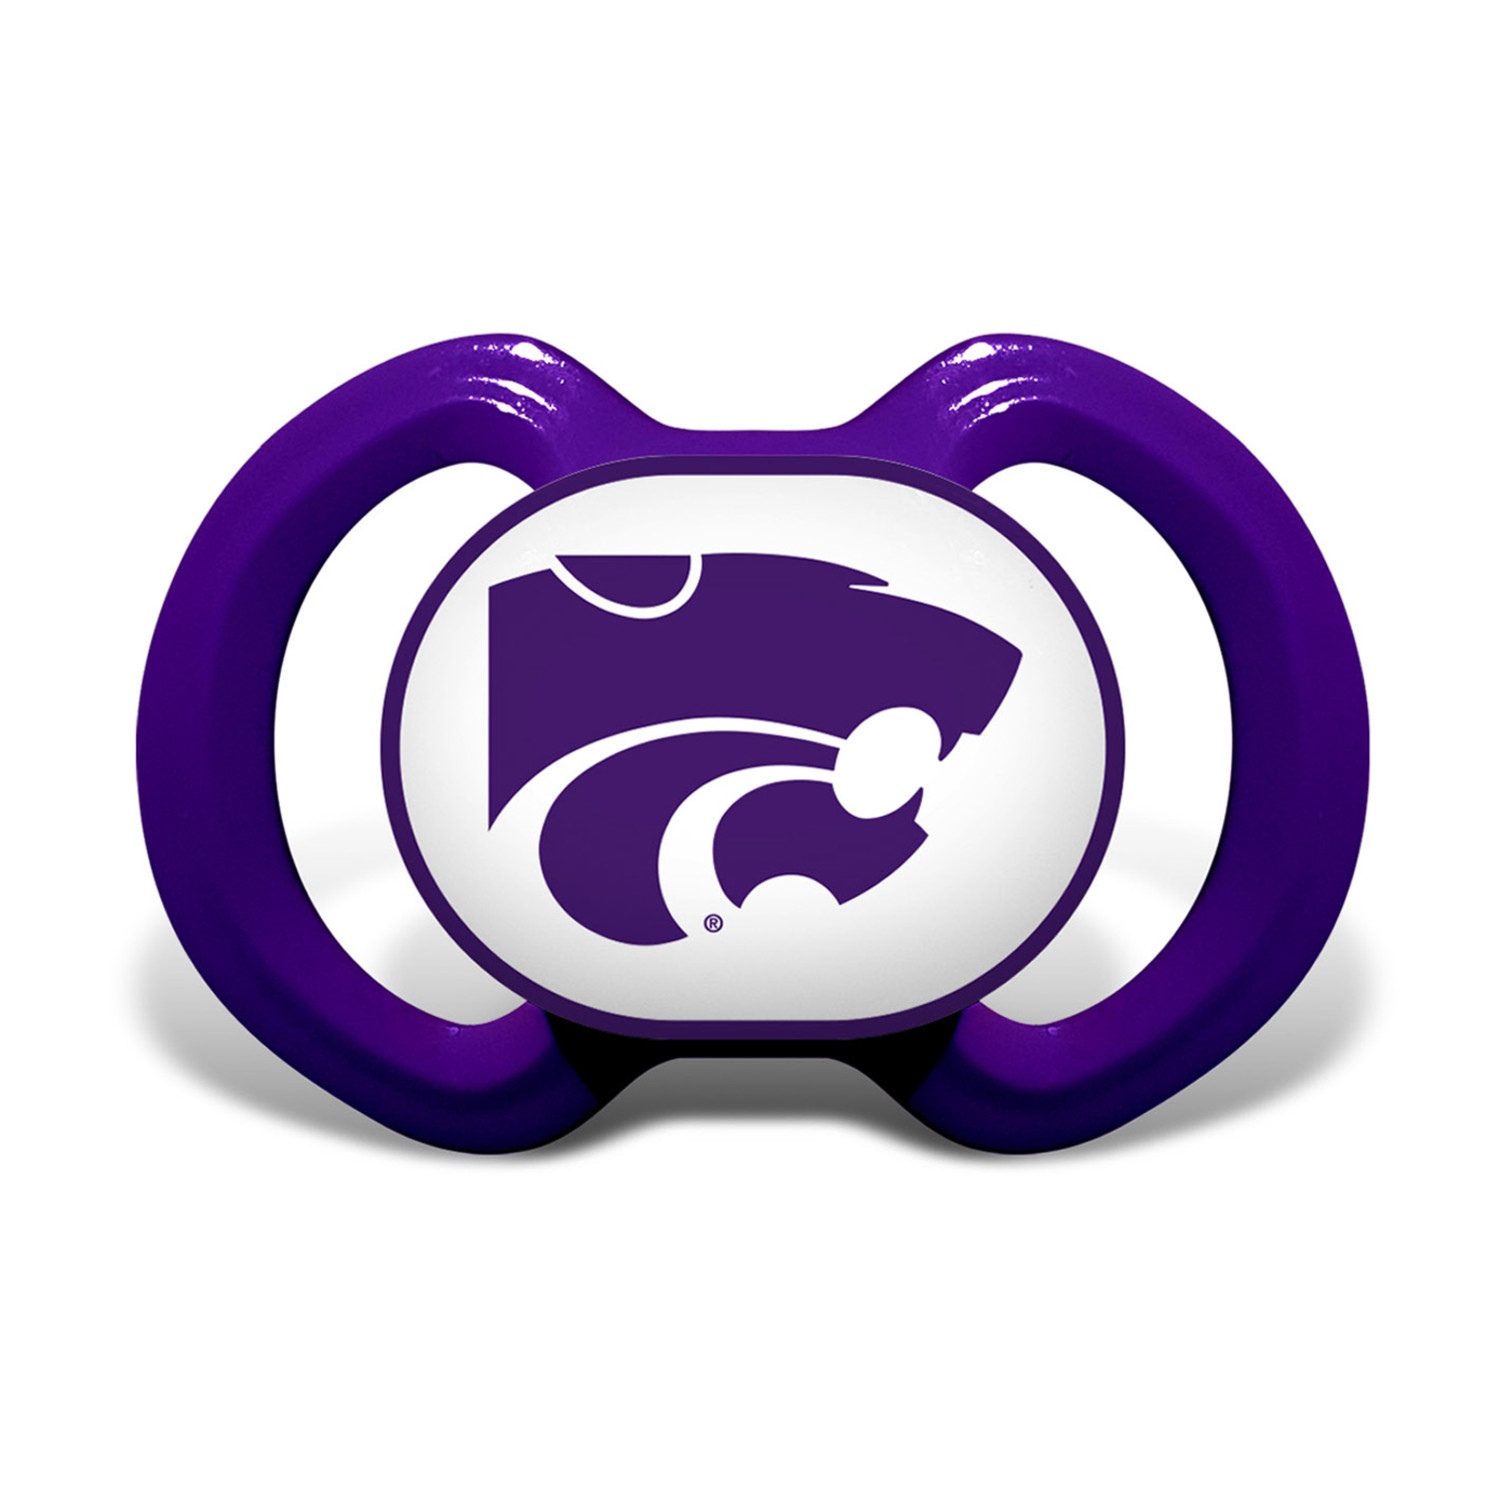 BabyFanatic Officially Licensed 3 Piece Unisex Gift Set - NCAA Kansas State Wildcats - image 3 of 4